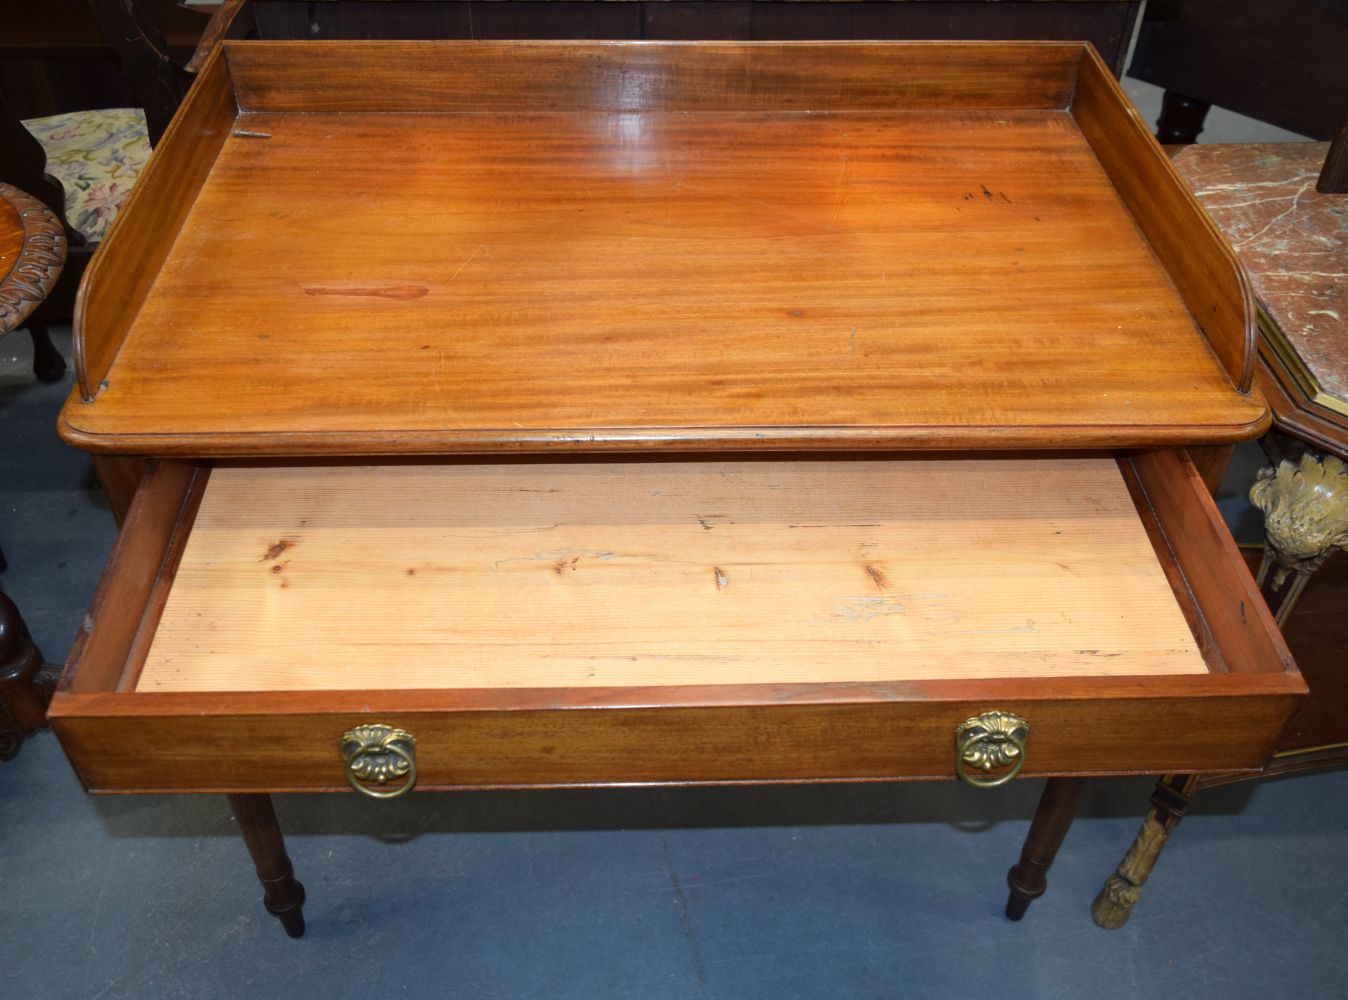 A GEORGE III MAHOGANY WRITING TABLE with single drawer. 83 cm x 92 cm x 55 cm. - Image 2 of 4